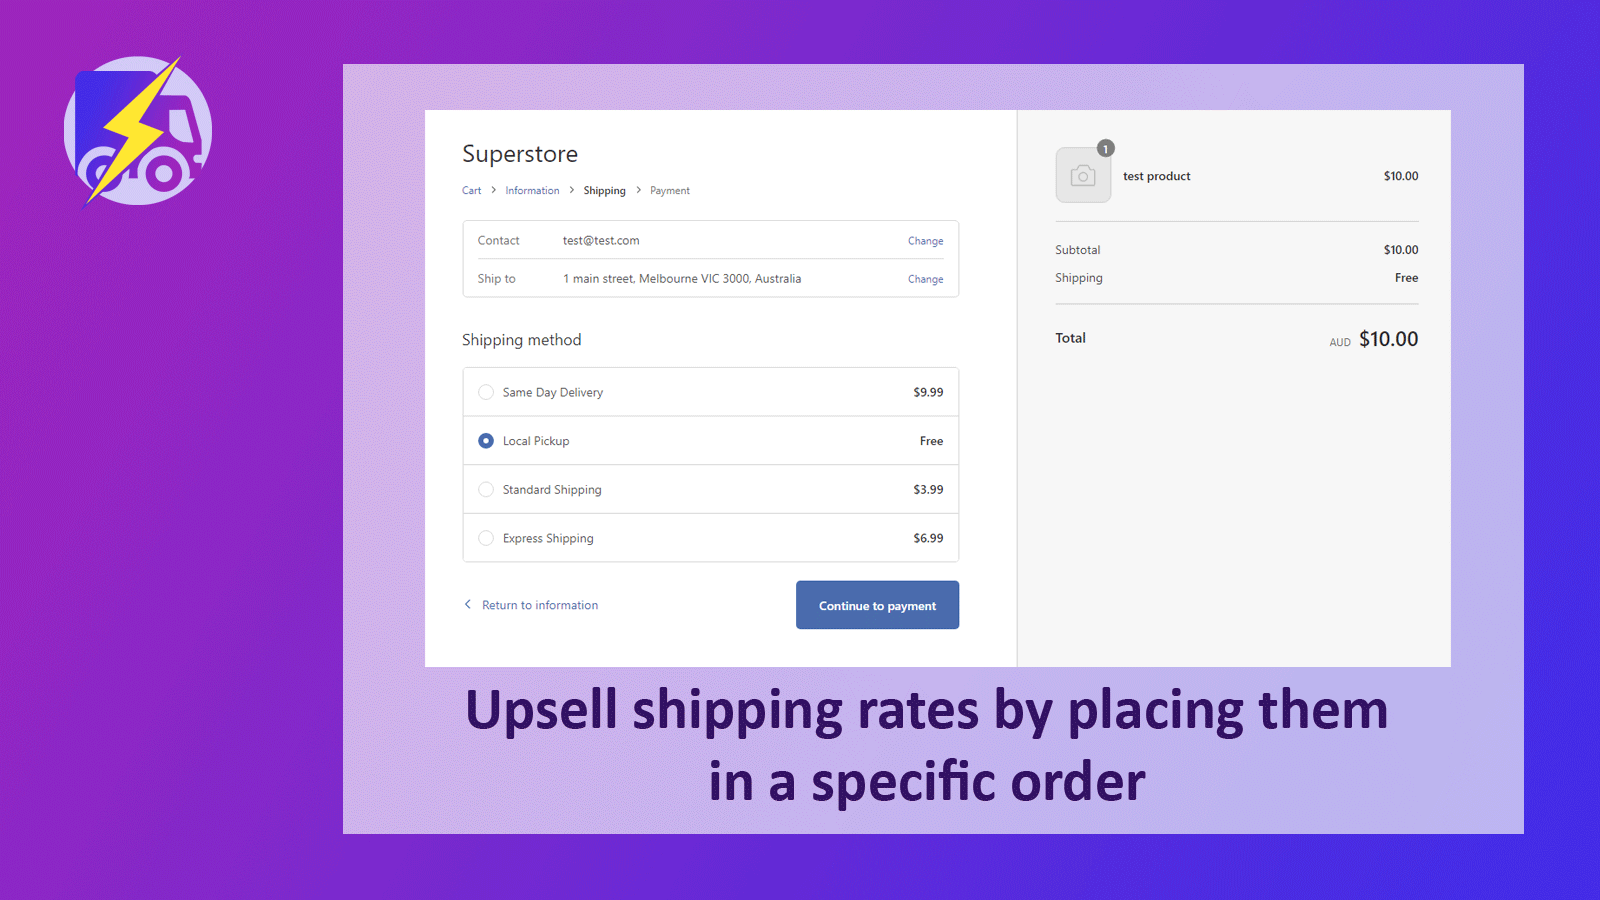 Upsell rates by ordering them to the top